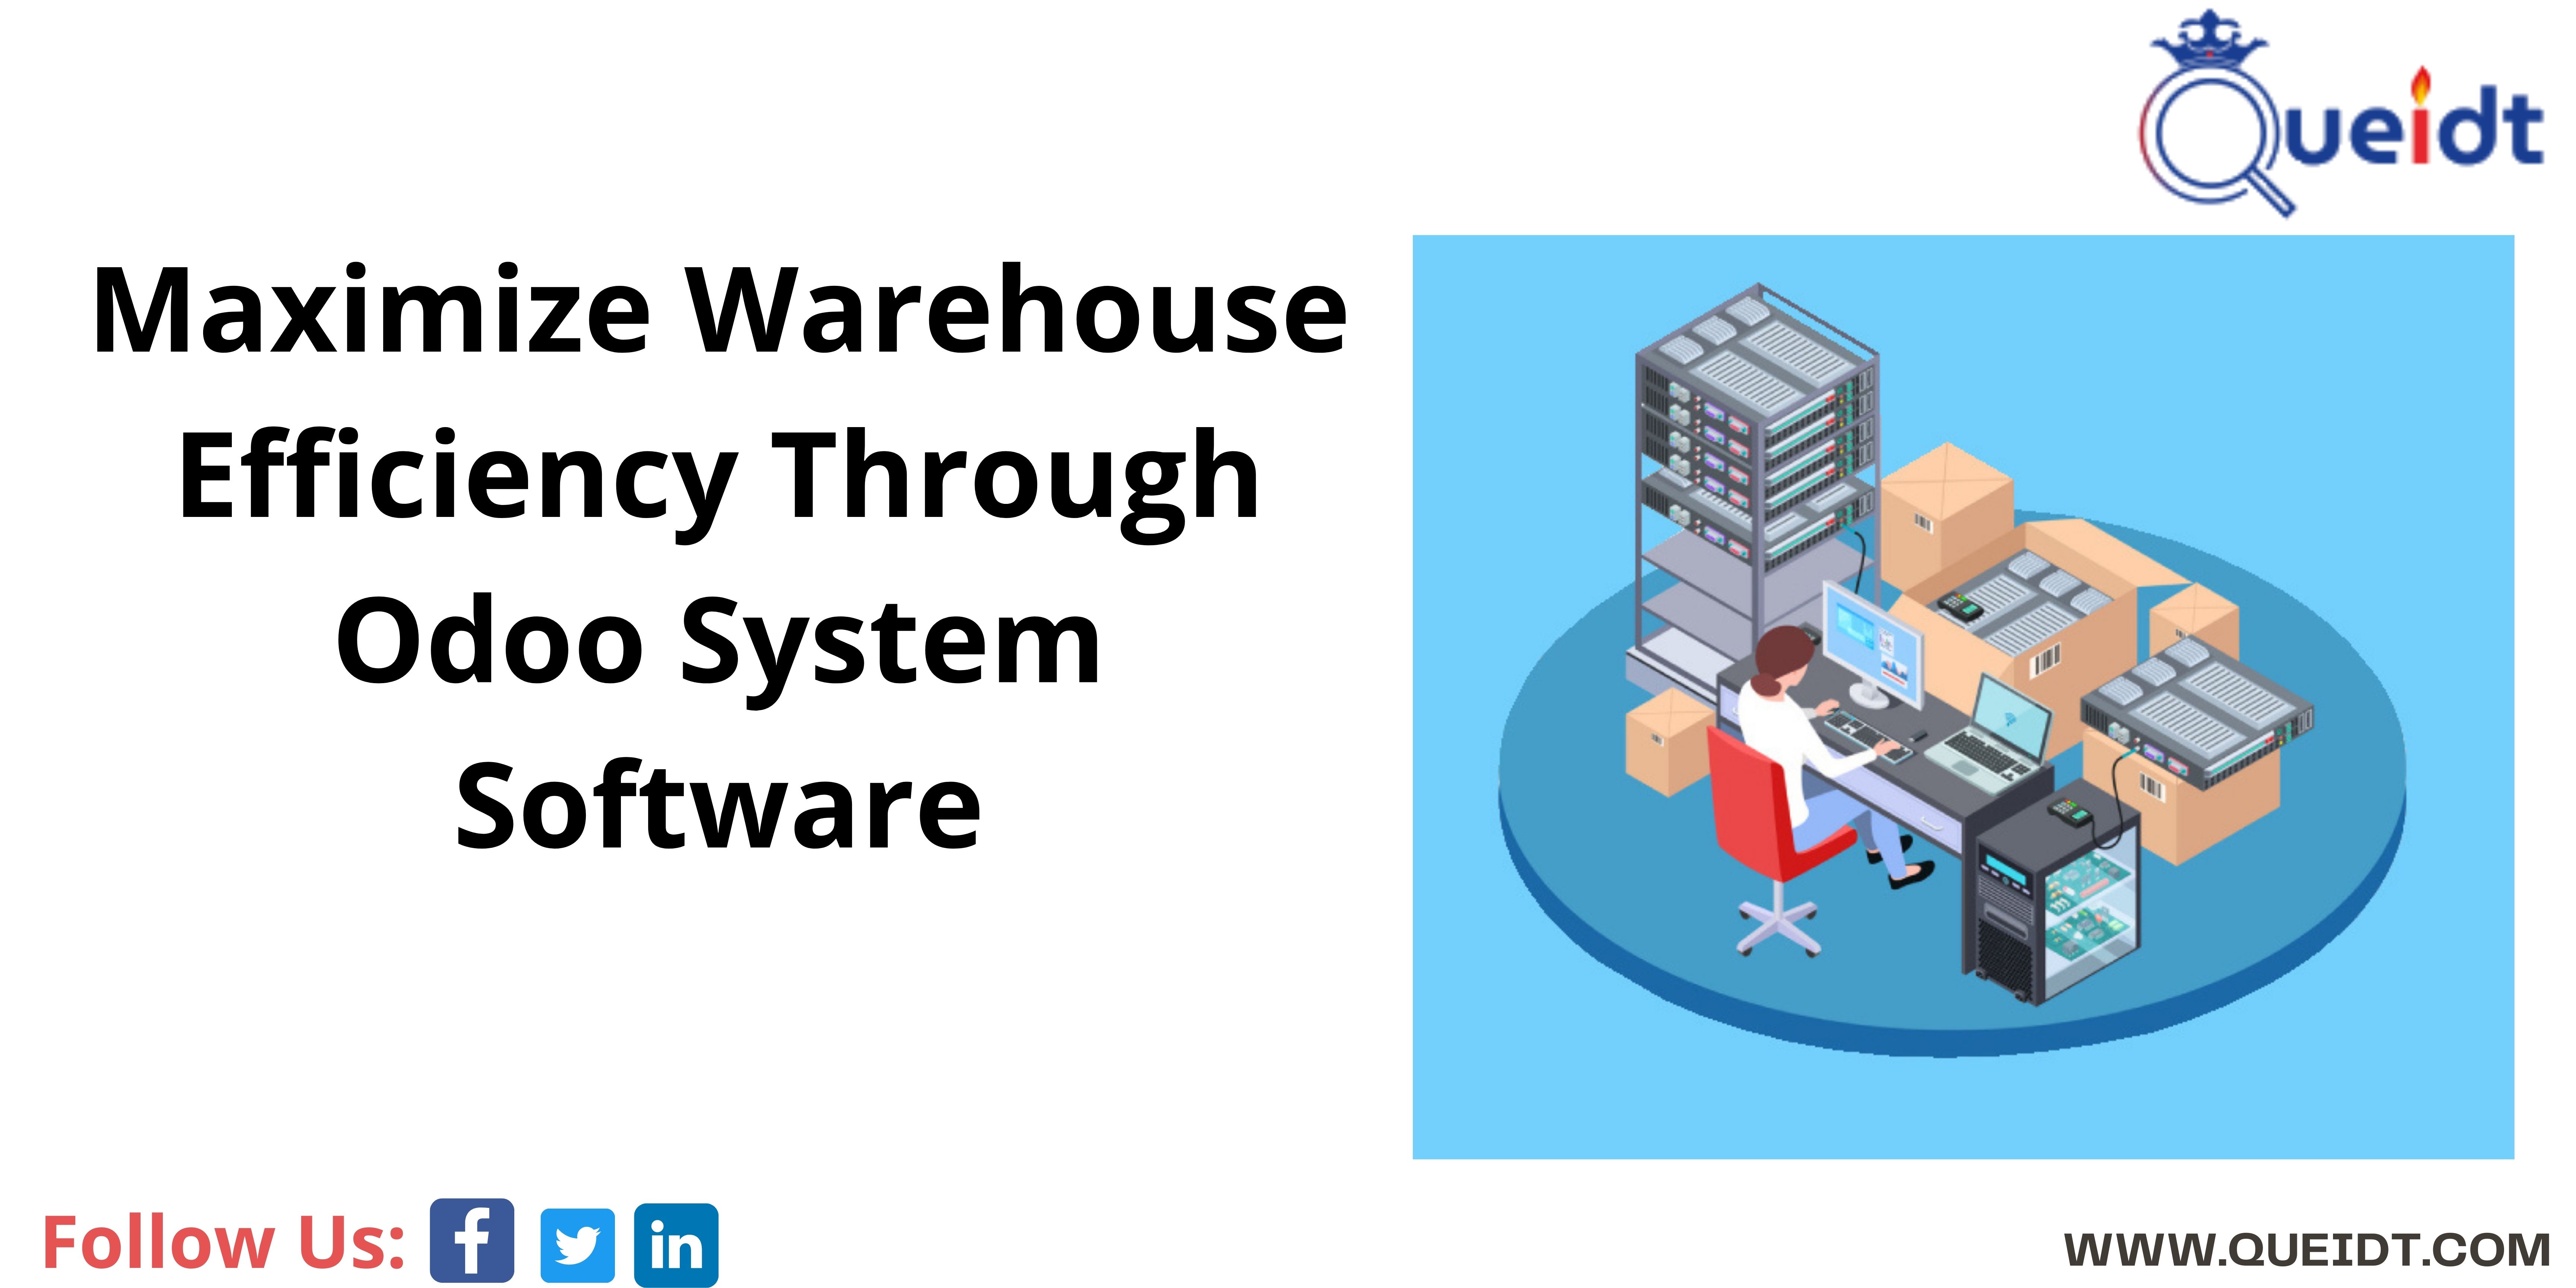 Maximize Warehouse Efficiency Through Odoo System Software